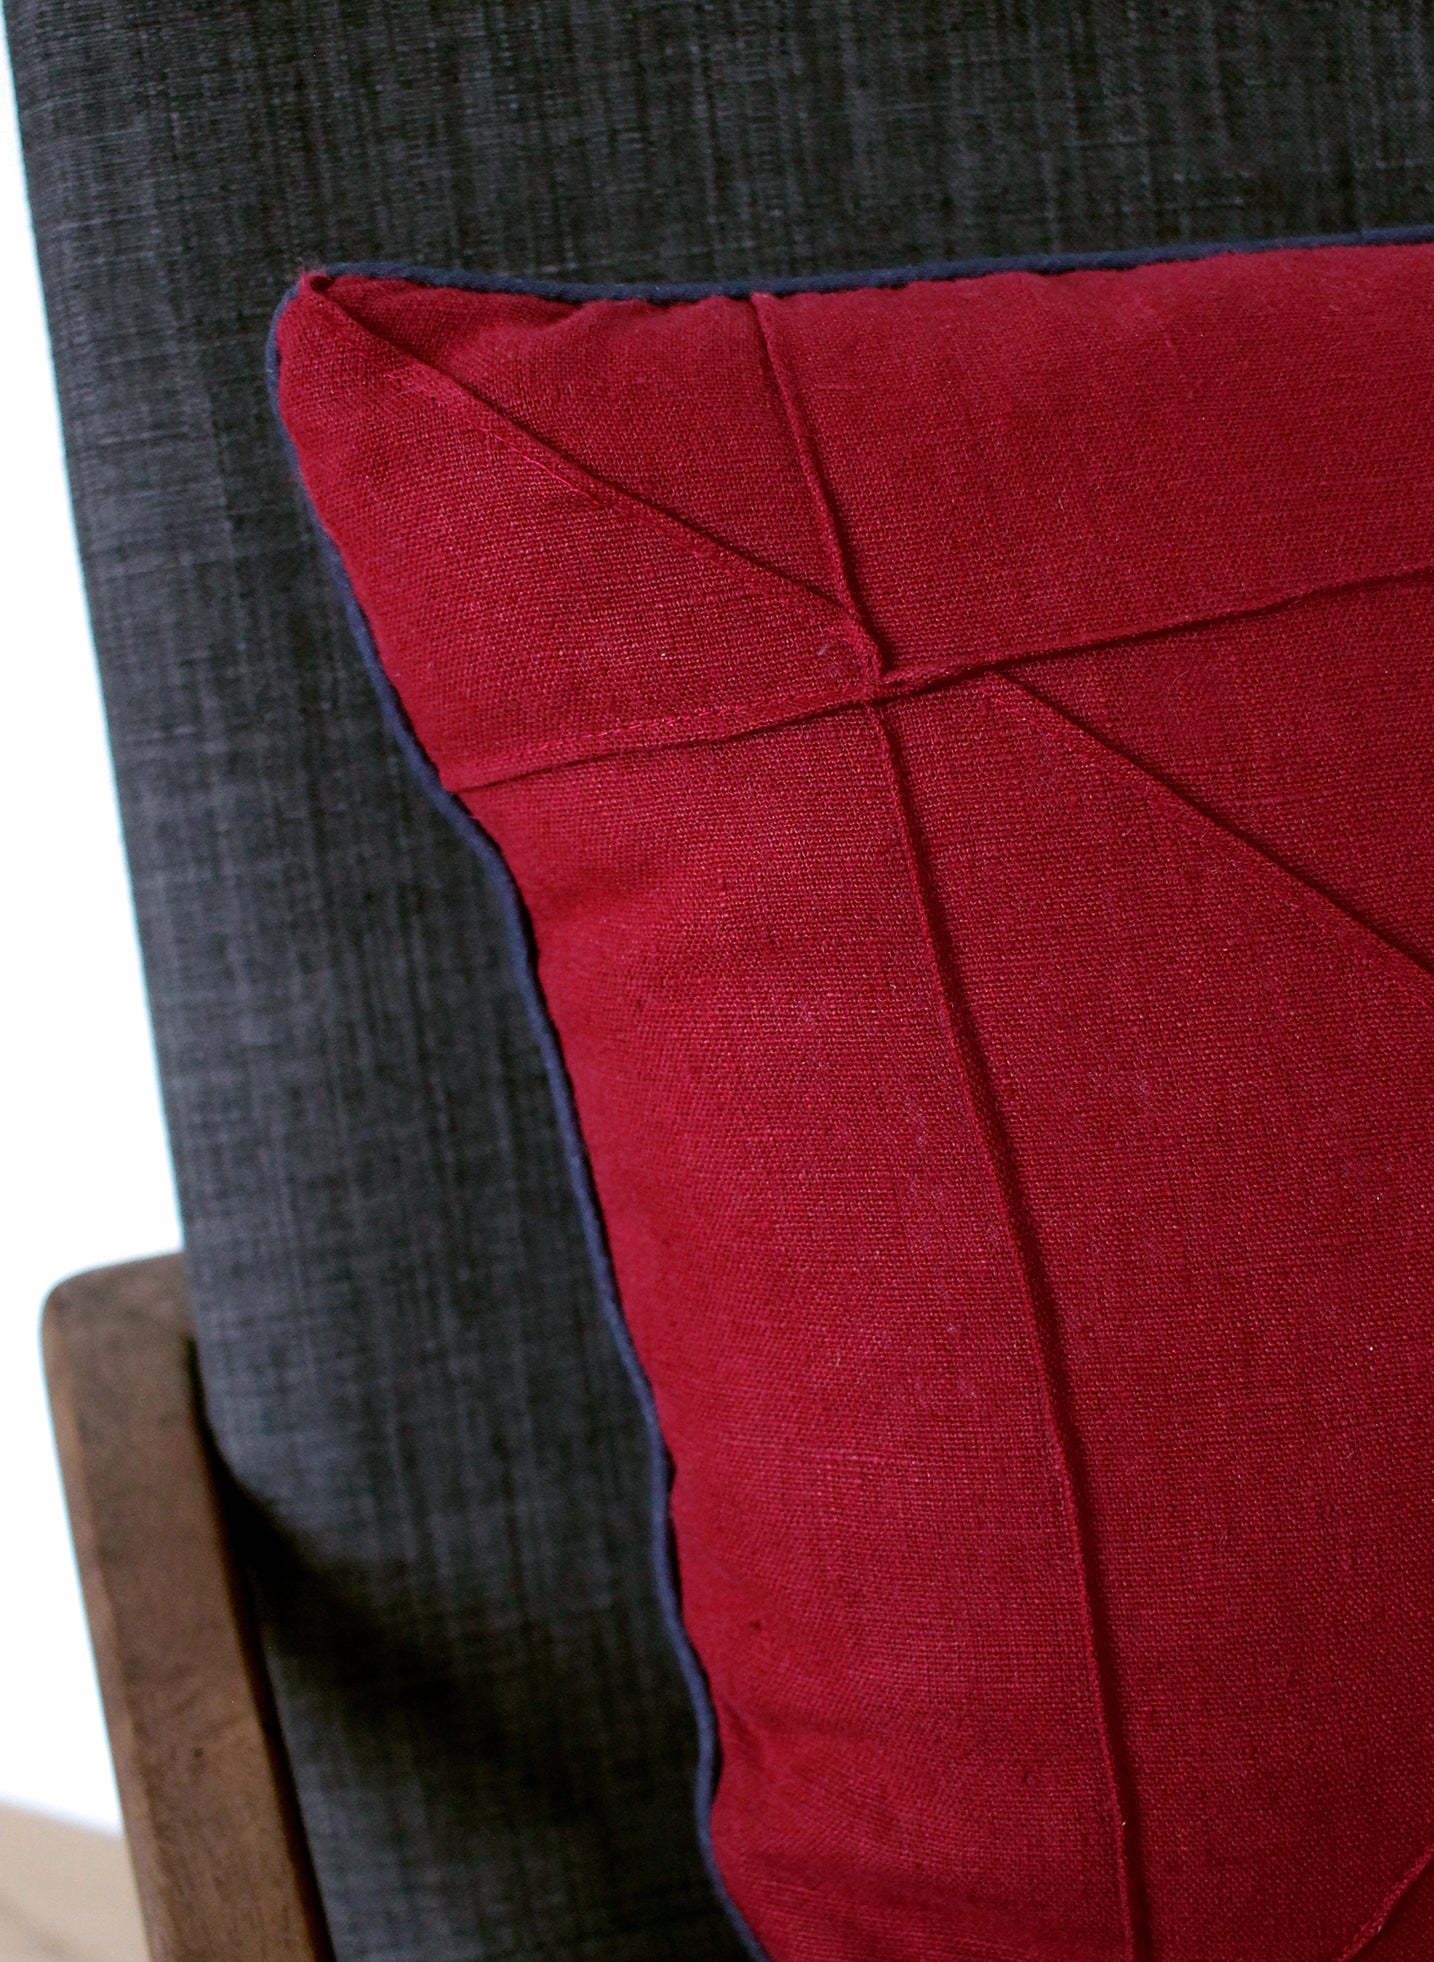 Detail of origami stitching on cranberry linen cushion cover